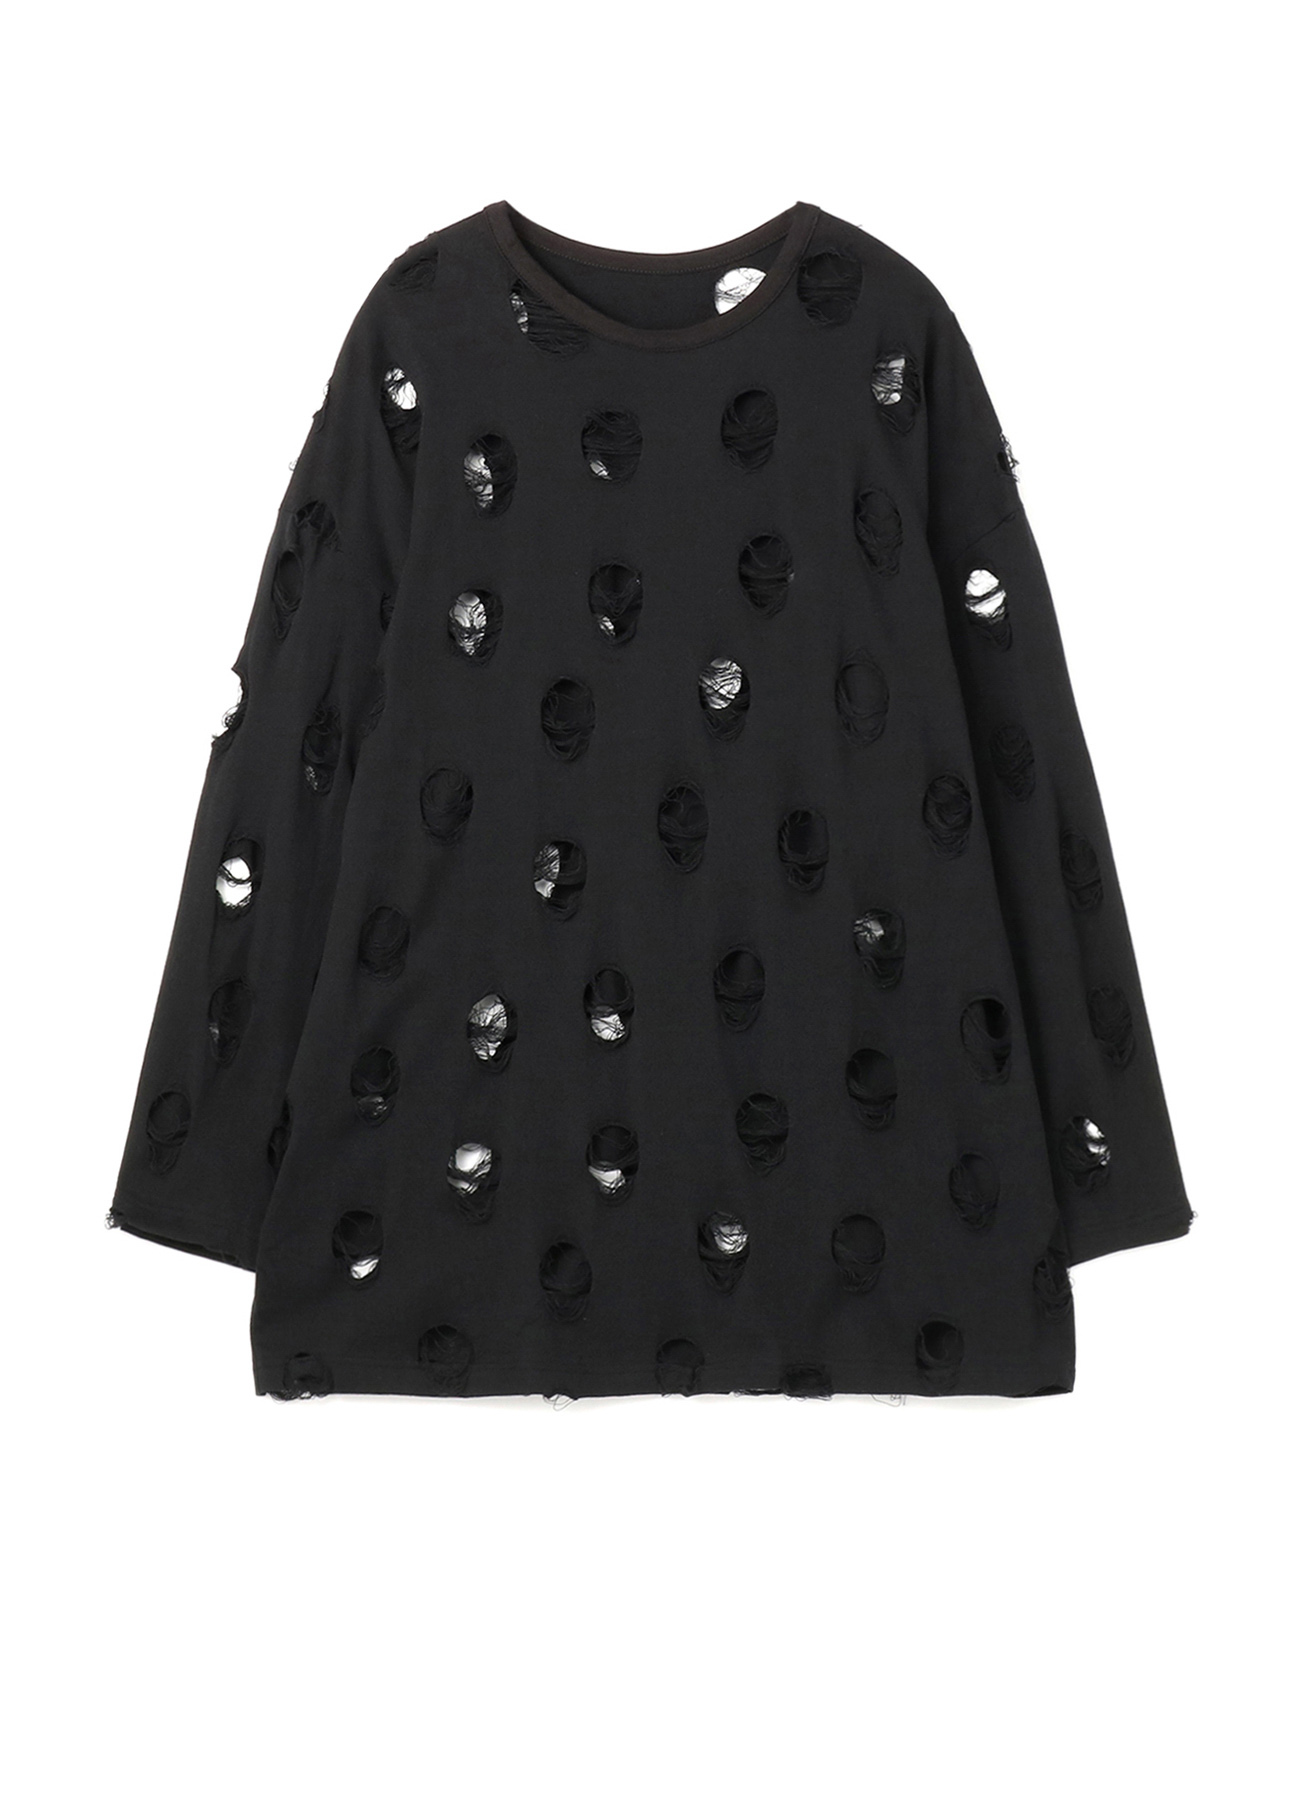 DOTTED PLAIN STITCH ROUND NECK LONG SLEEVE T